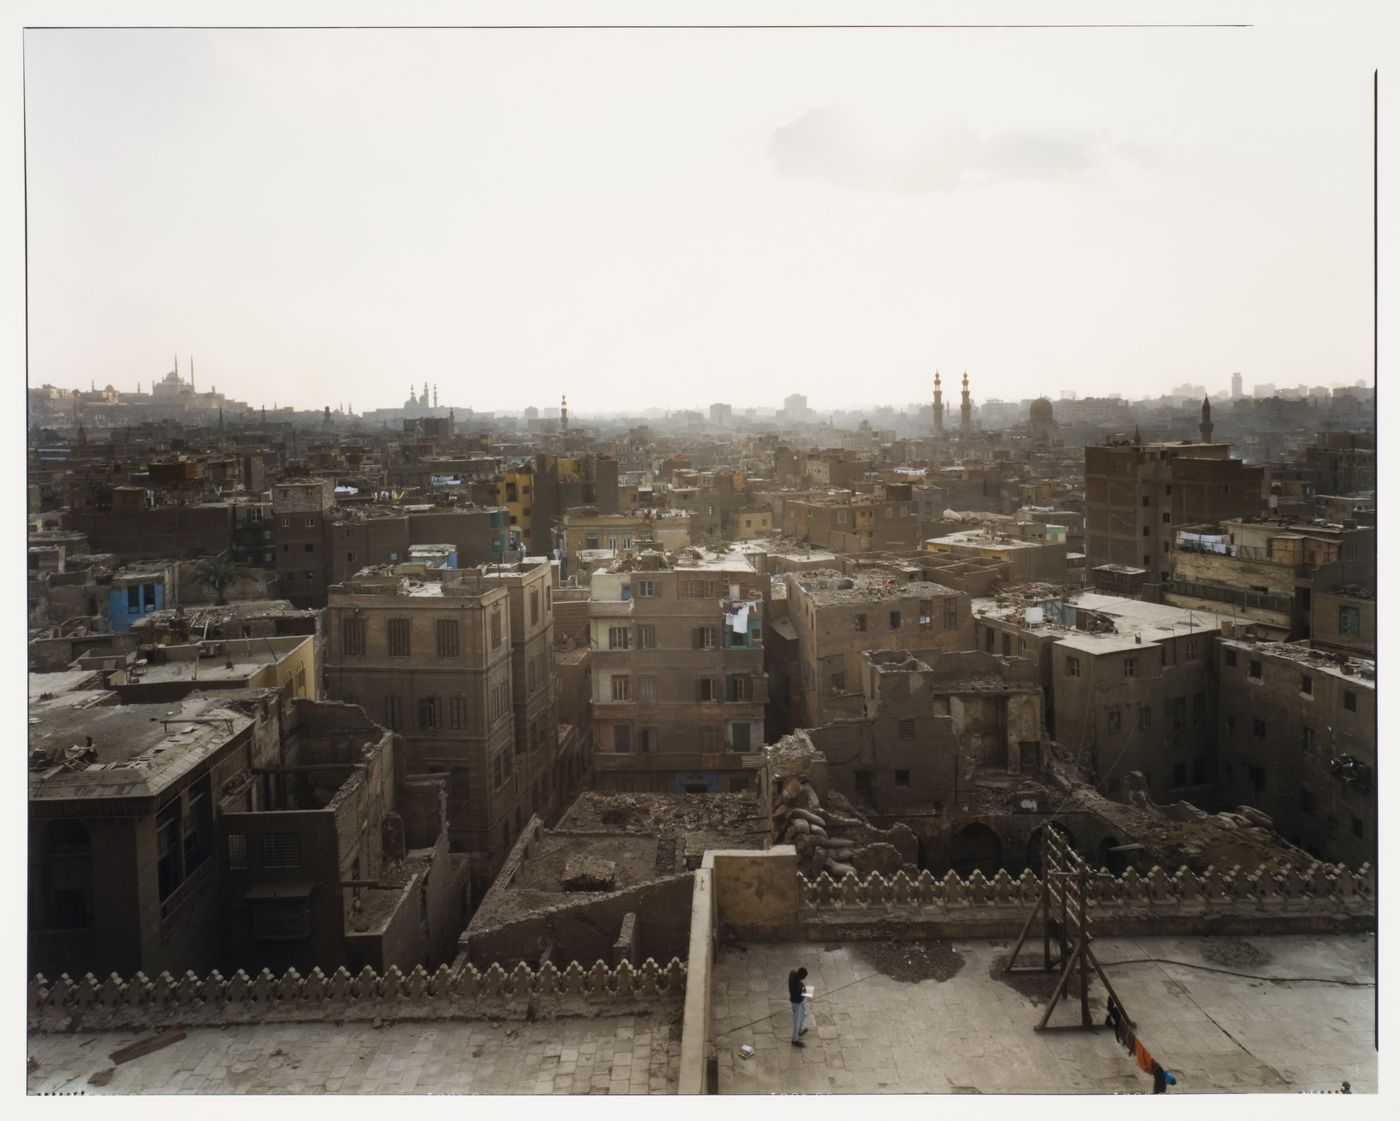 View of city from El Ashar, showing figure on roof directly below, Cairo, Egypt